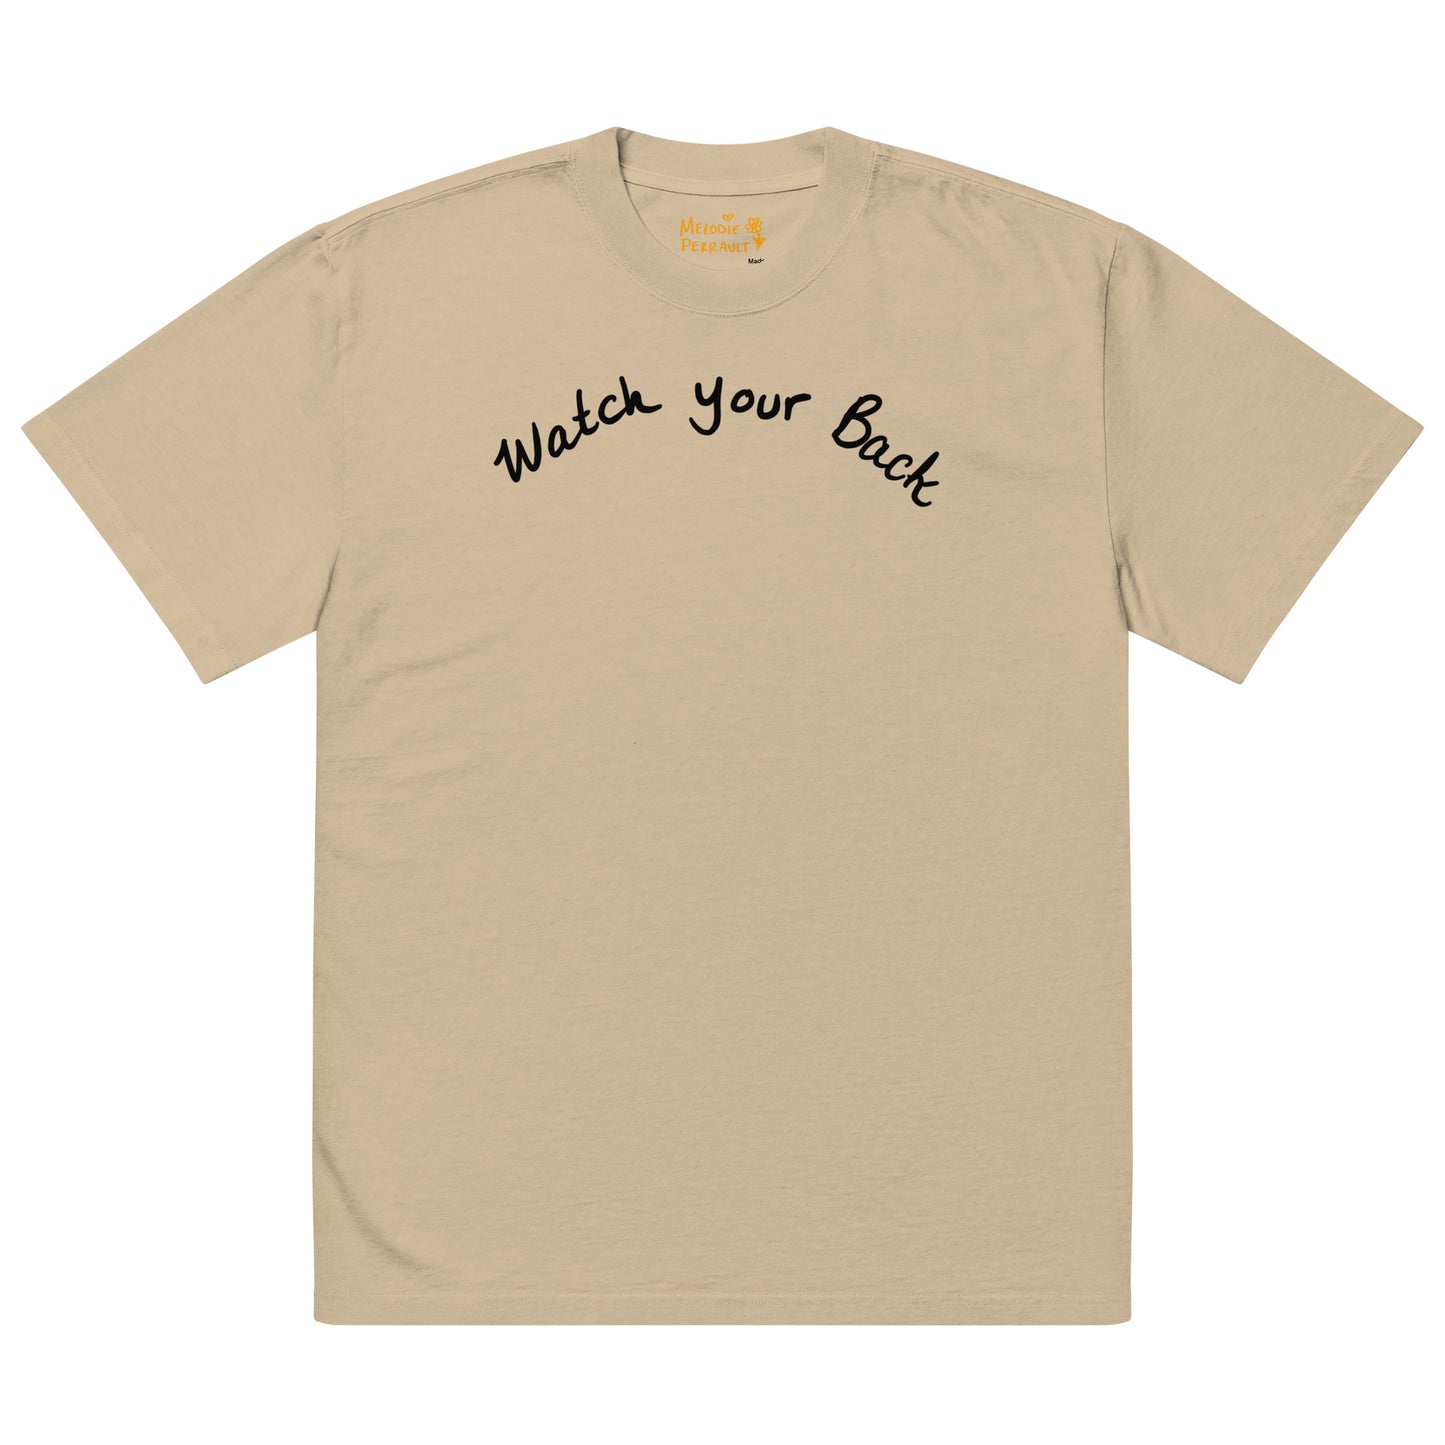 " Watch Your Back " Oversized faded t-shirt